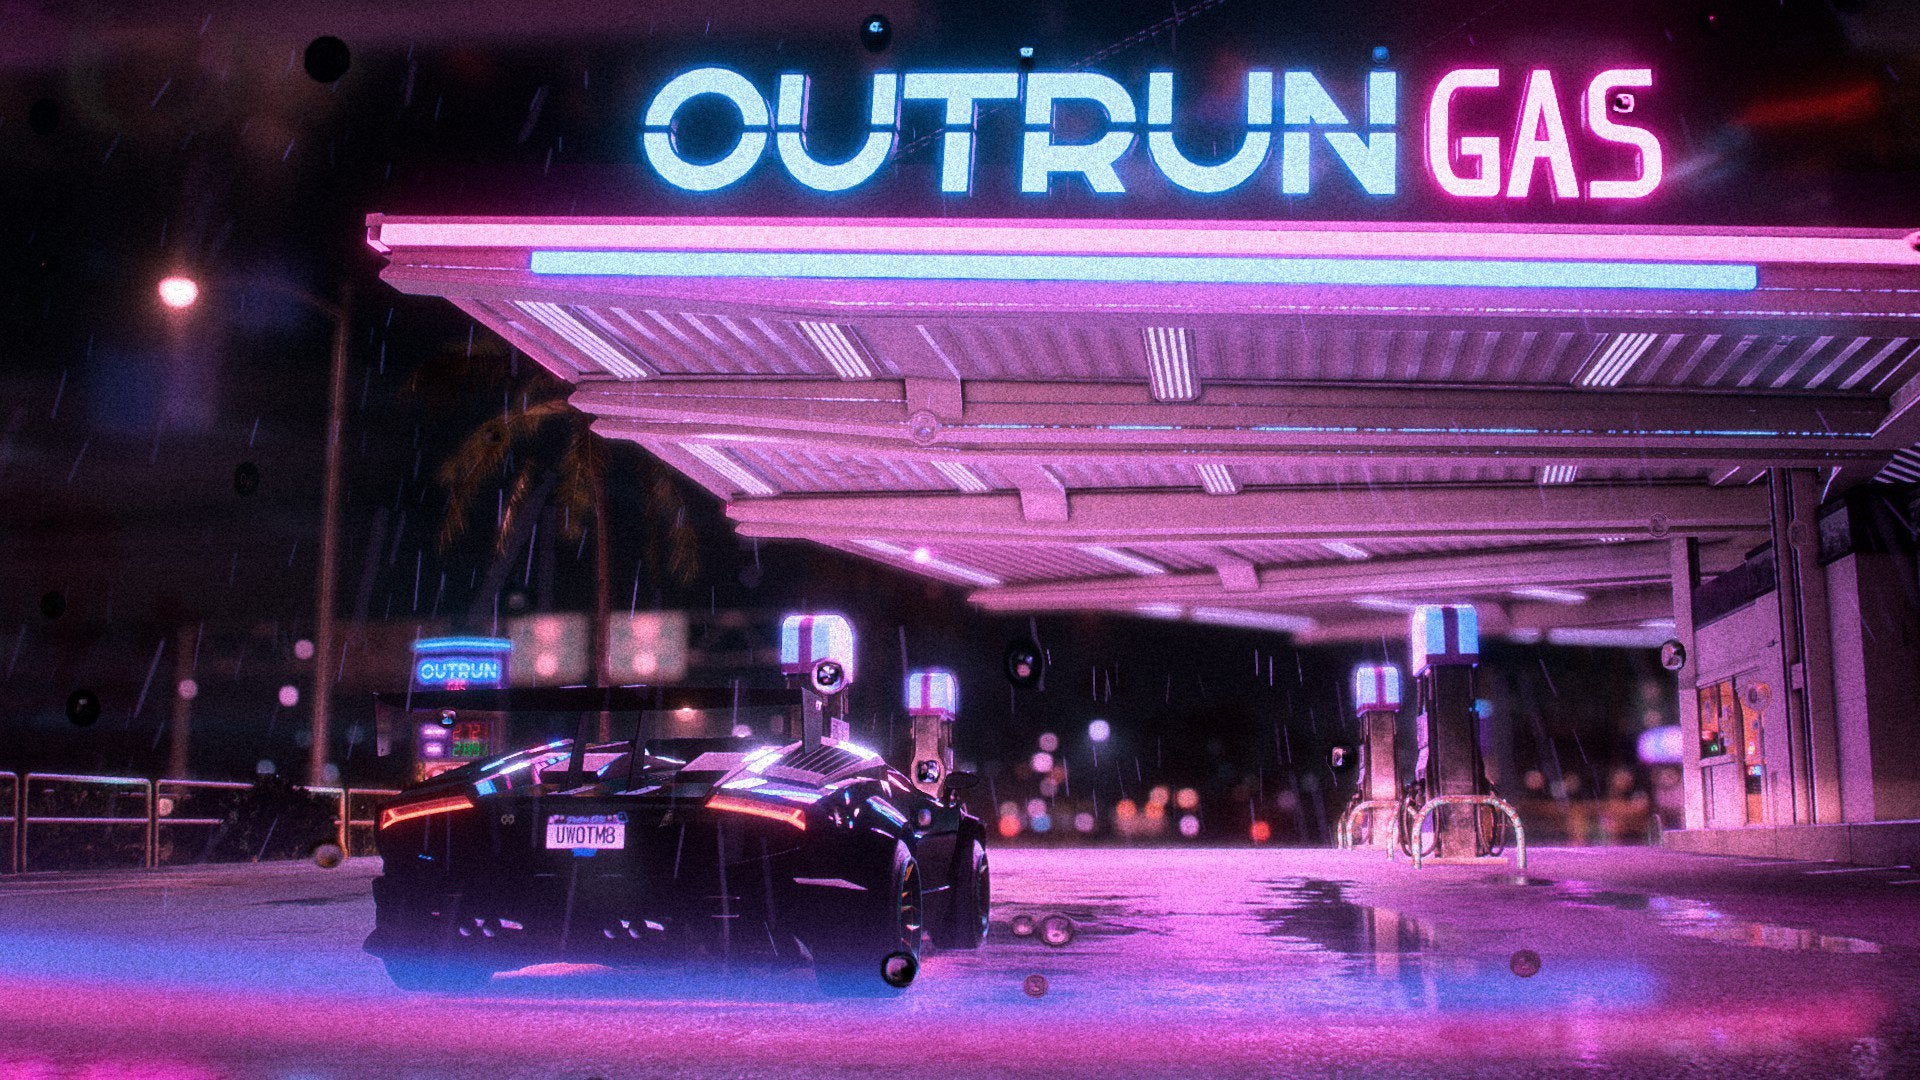 Stopping off to get a drink at my favourite gas station while Synthwave blasts out of the windows